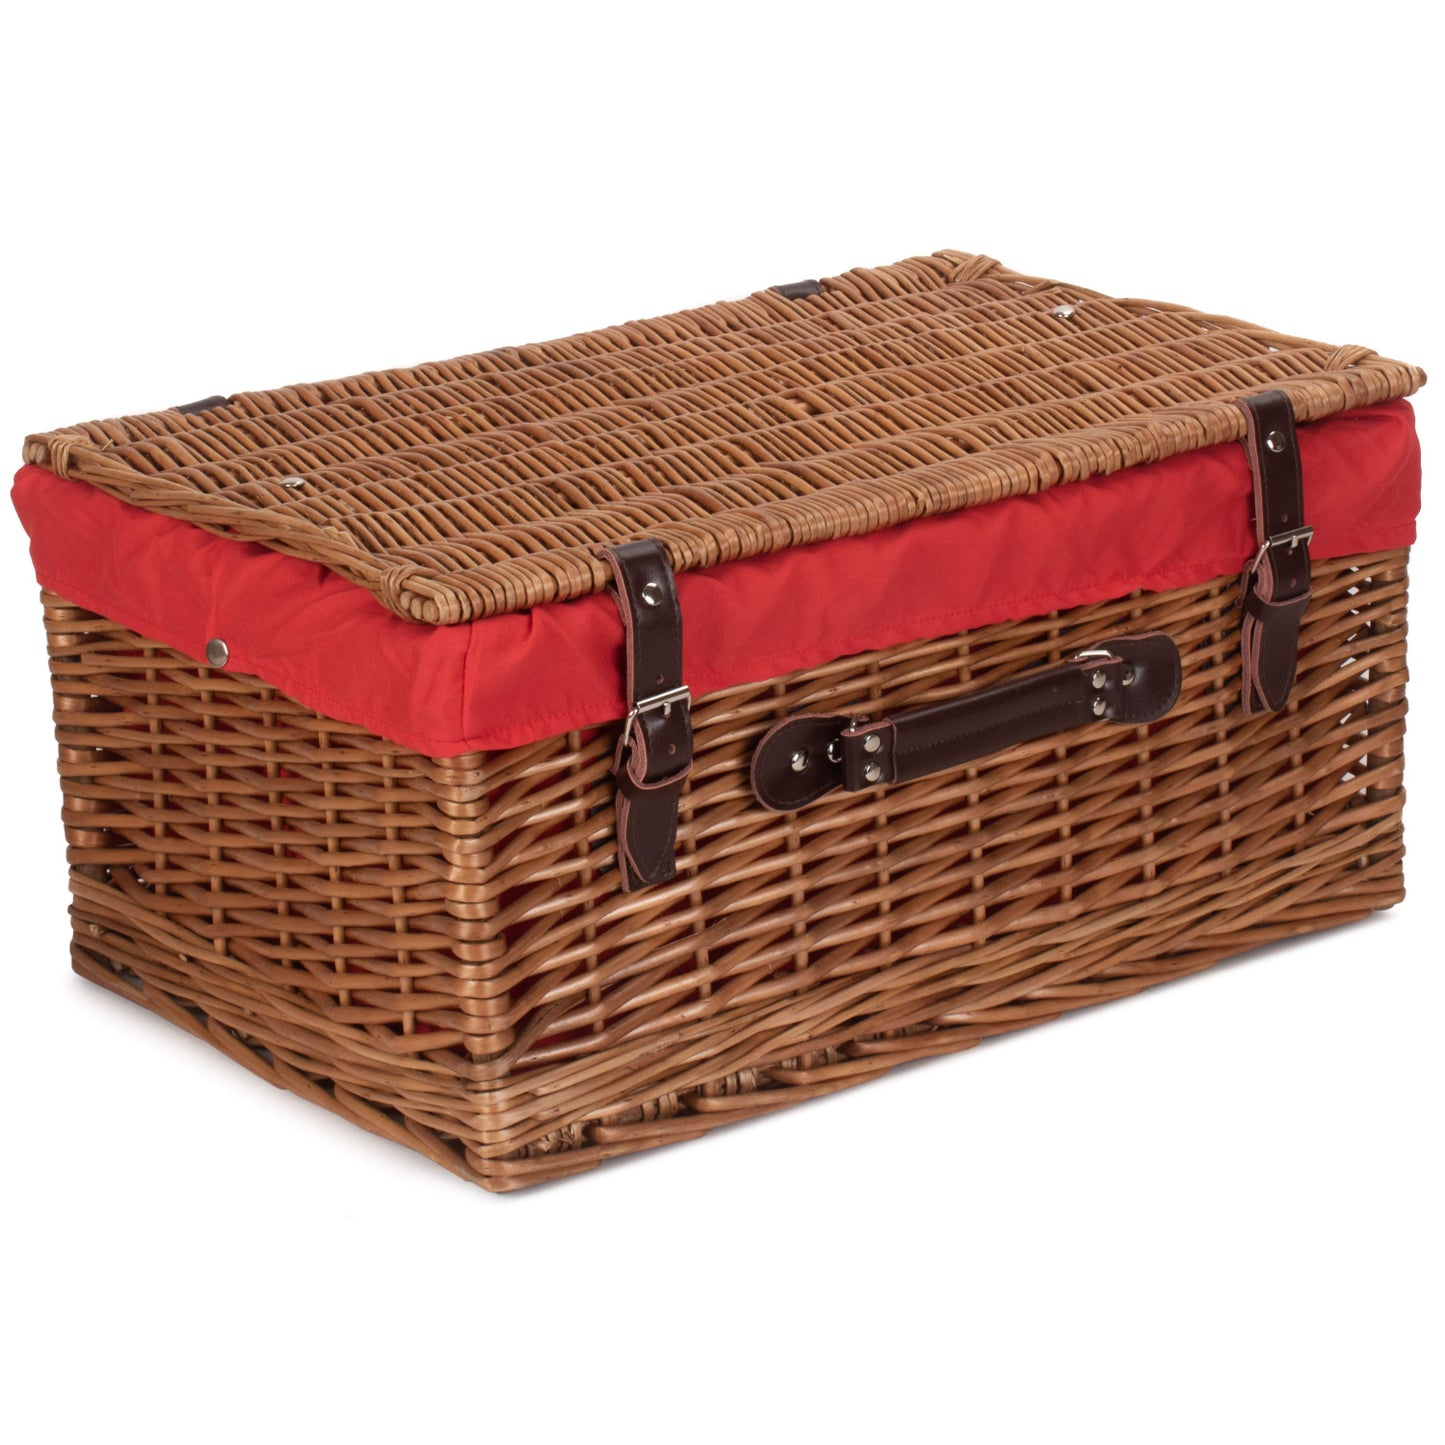 20 Inch Double Steamed Hamper With Red Lining